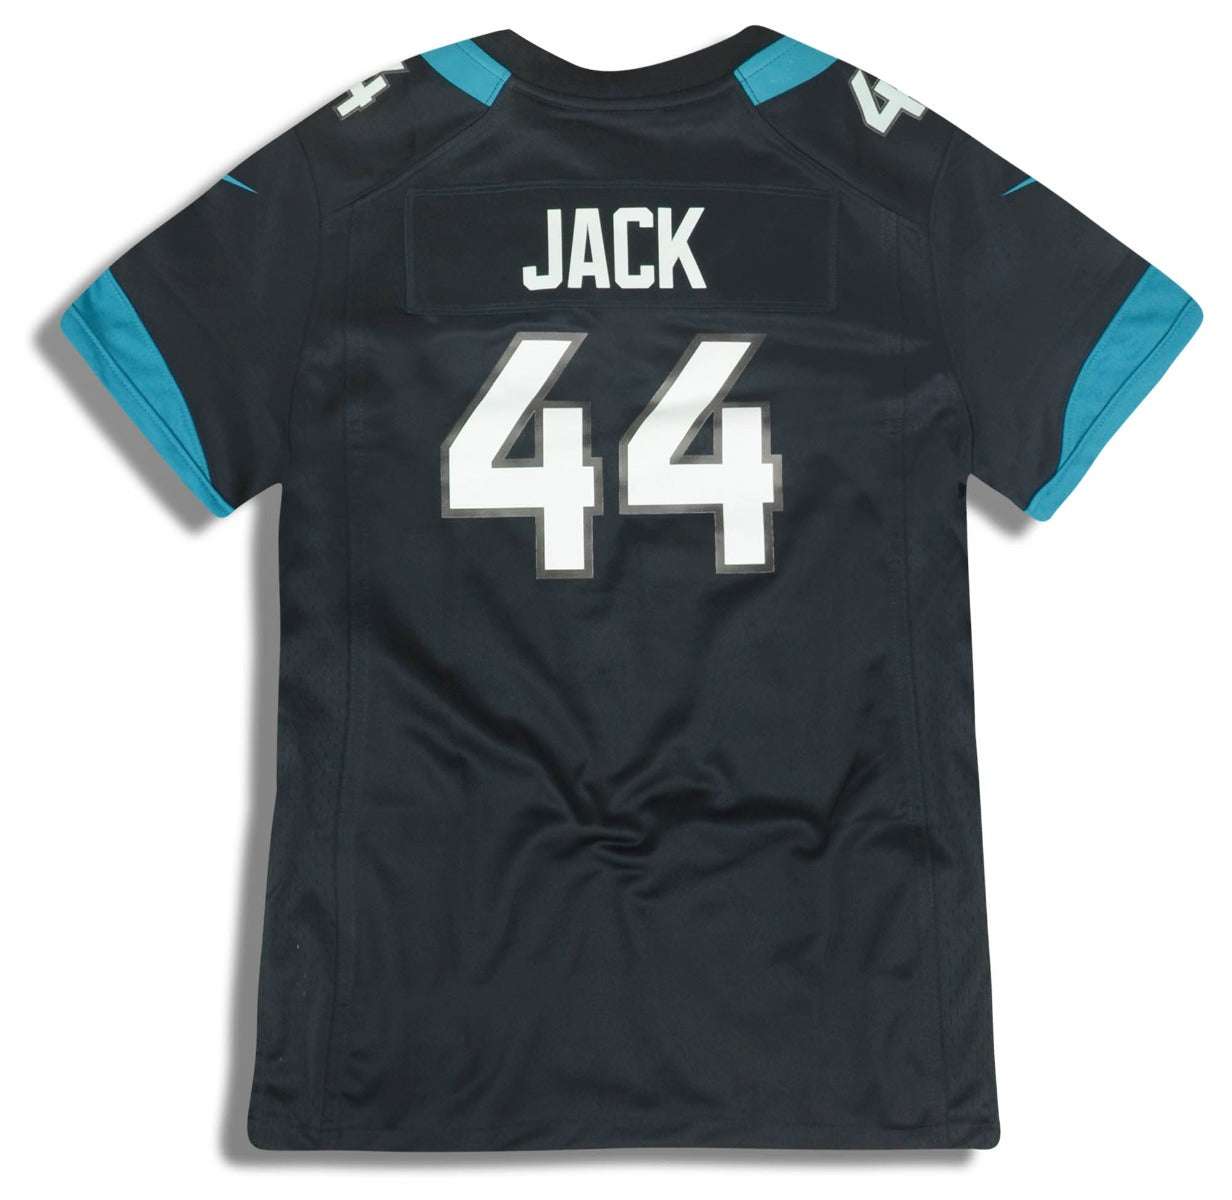 2018 JACKSONVILLE JAGUARS JACK #44 NIKE GAME JERSEY (HOME) WOMENS (S) - W/TAGS